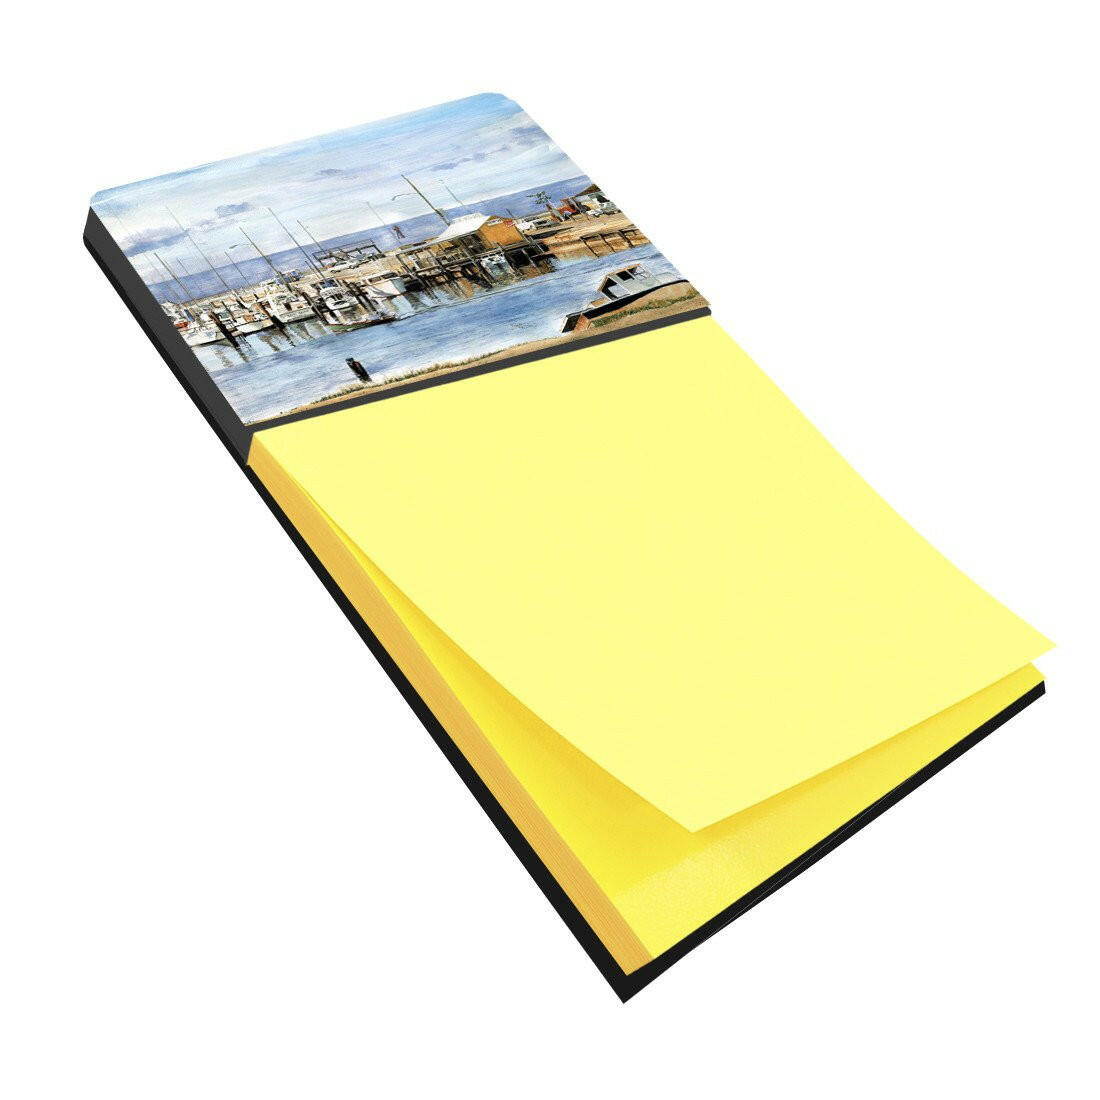 The Pass Bait Shop Refiillable Sticky Note Holder or Postit Note Dispenser 8129SN by Caroline's Treasures